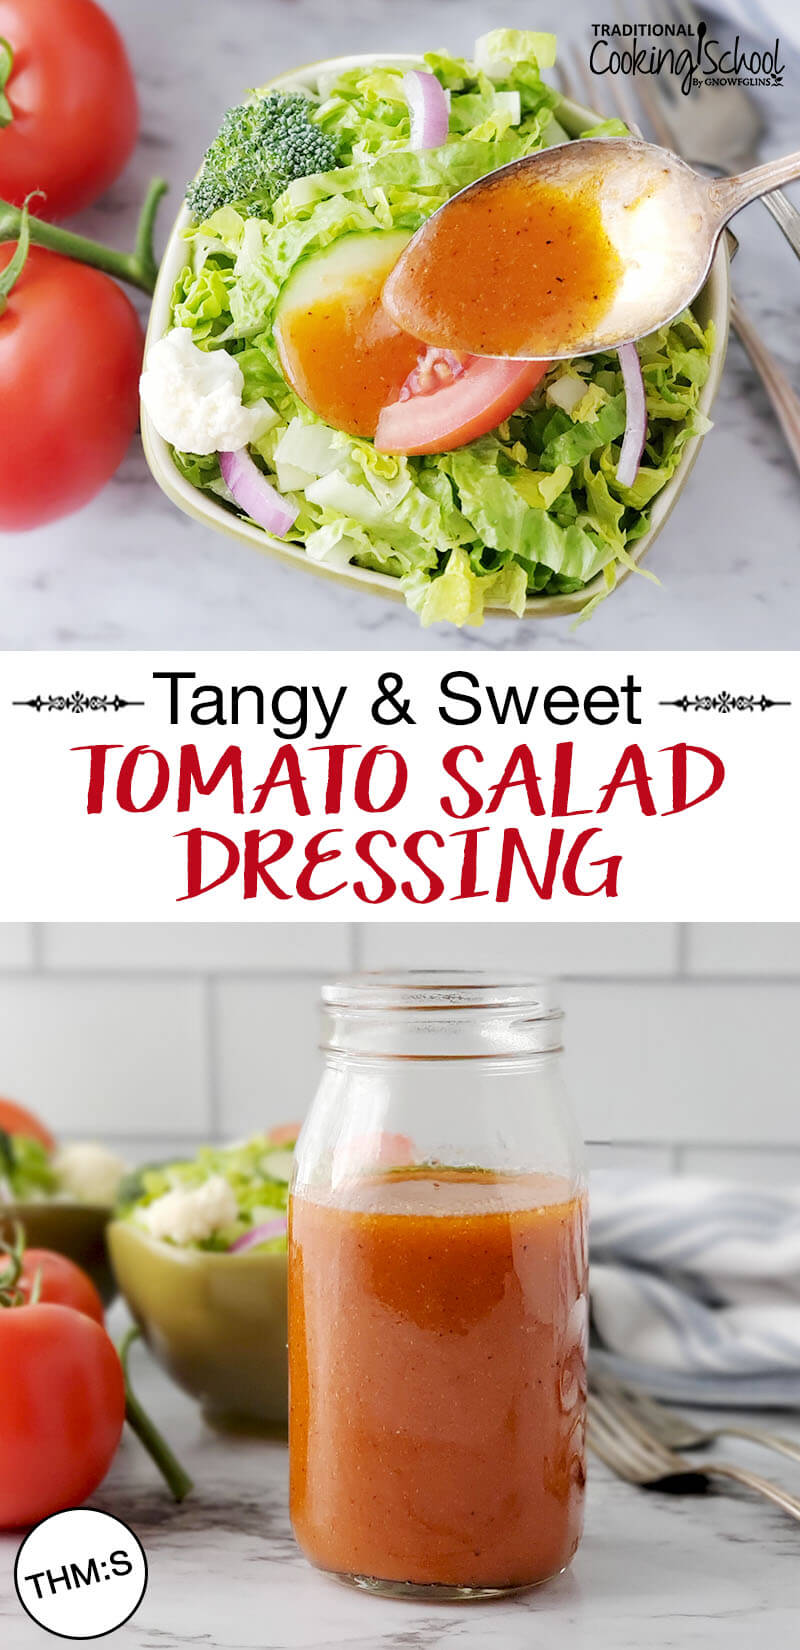 photo collage of a spoonful of tomato vinaigrette being drizzled over a green salad, and a small jar of tomato dressing. Text overlay: "Tangy & Sweet Tomato Salad Dressing (THM:S)"